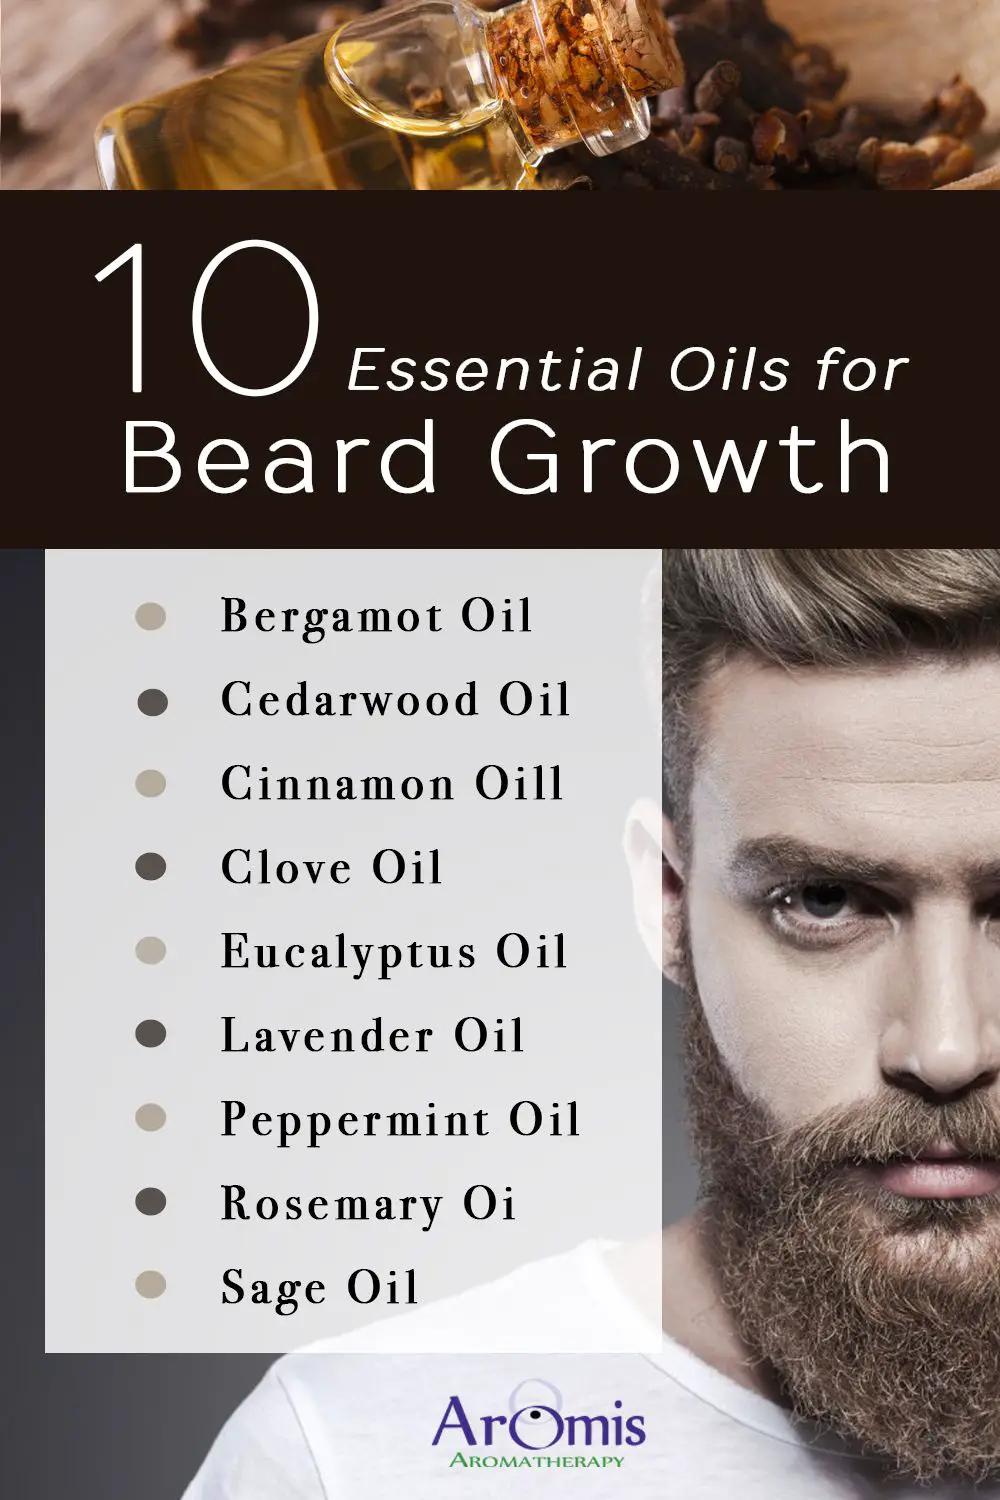 How to Get the Best Beard Oil-Essential Oils for Beard Growth